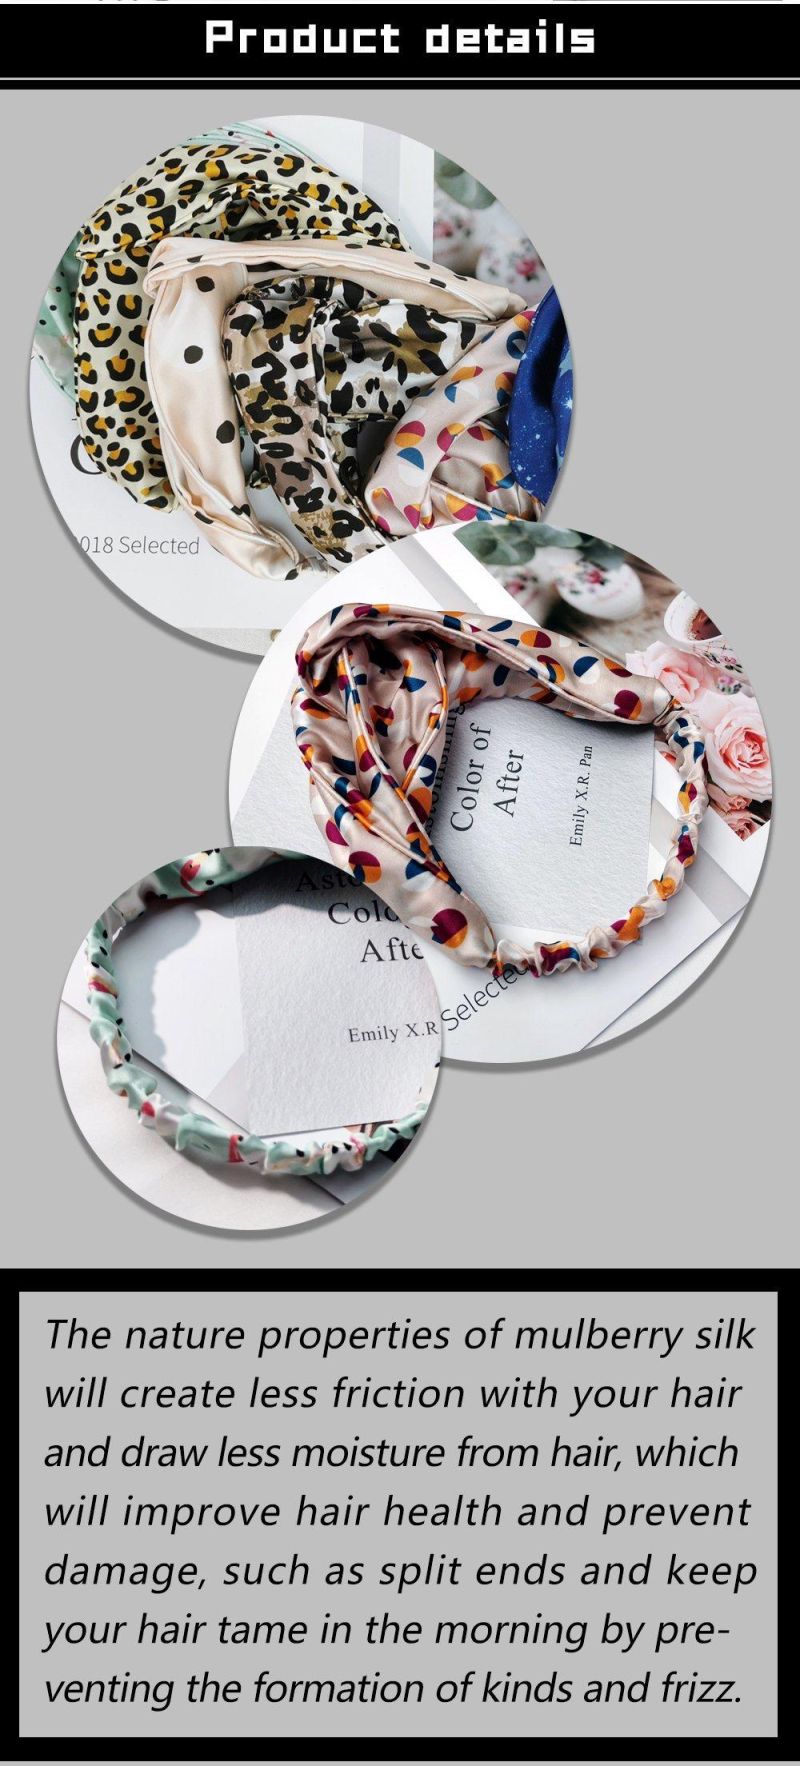 100% Mulberry Silk Headband with Fashionable Printed Pattern